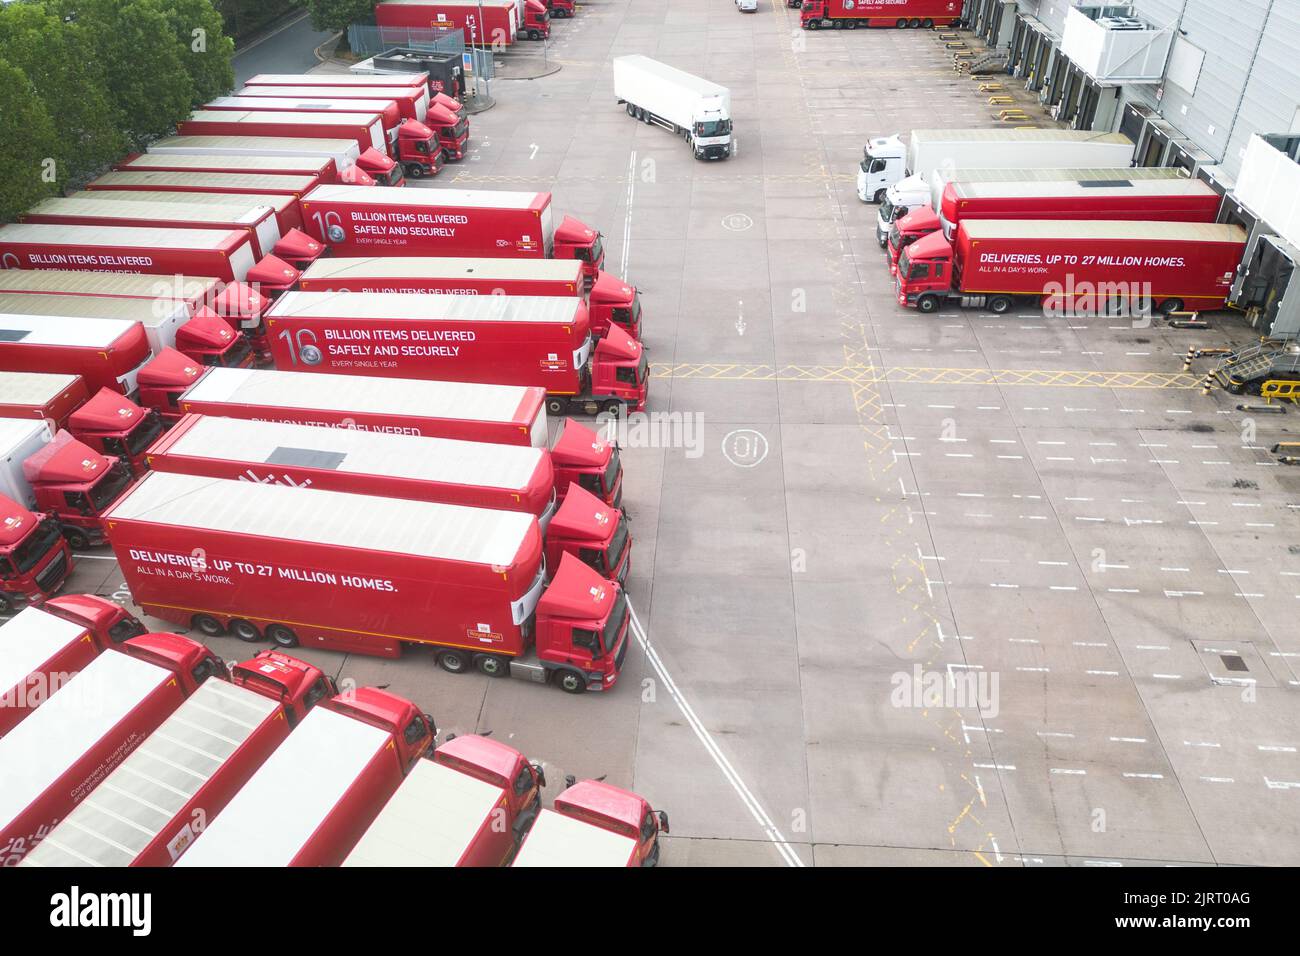 St Stephens Street, Birmingham August 26th 2022 - Birmingham's Mail Centre on St Stephens Street in the Newtown area of the city is lined with unused lorries, trucks and vans as over 100,000 employees strike over pay disputes. A small amount of staff were seen sorting mail from one van and agency drivers and staff from Whistl arrived with important deliveries. Credit: Scott CM/Alamy Live News Stock Photo